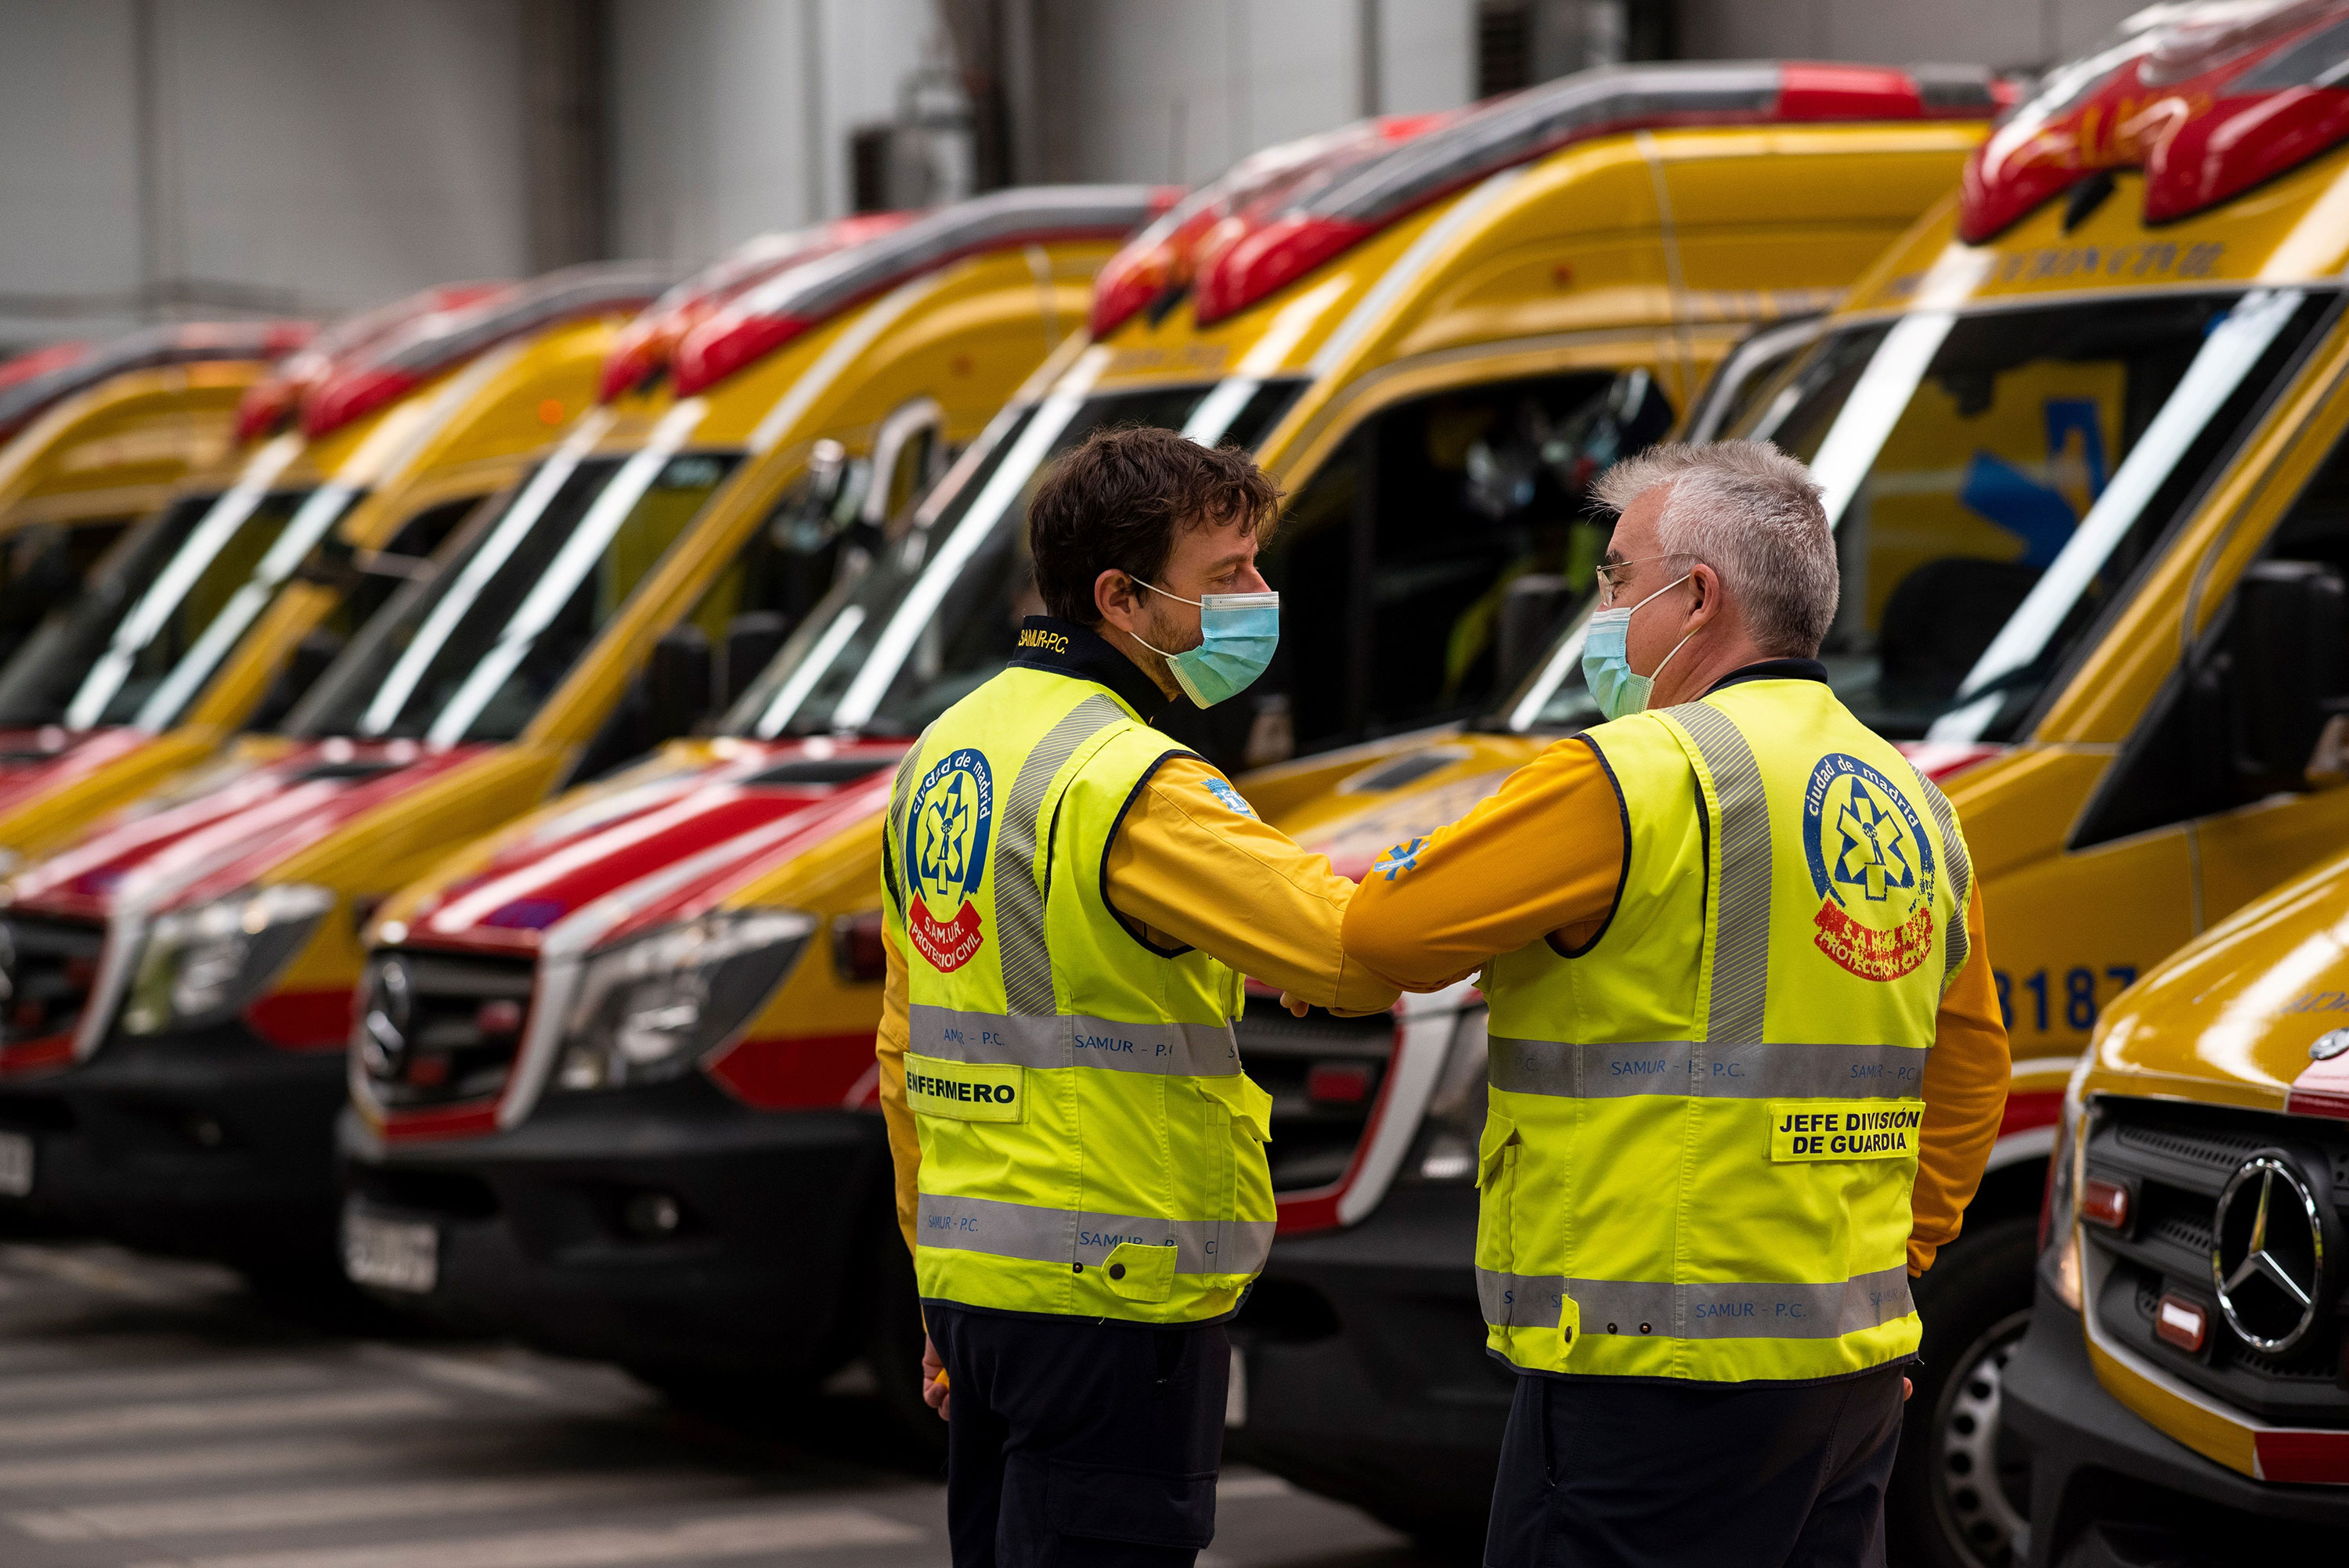 Two members of the Madrid Emergency Medical Service greet each other by touching elbows during a briefing in Madrid on May 15.